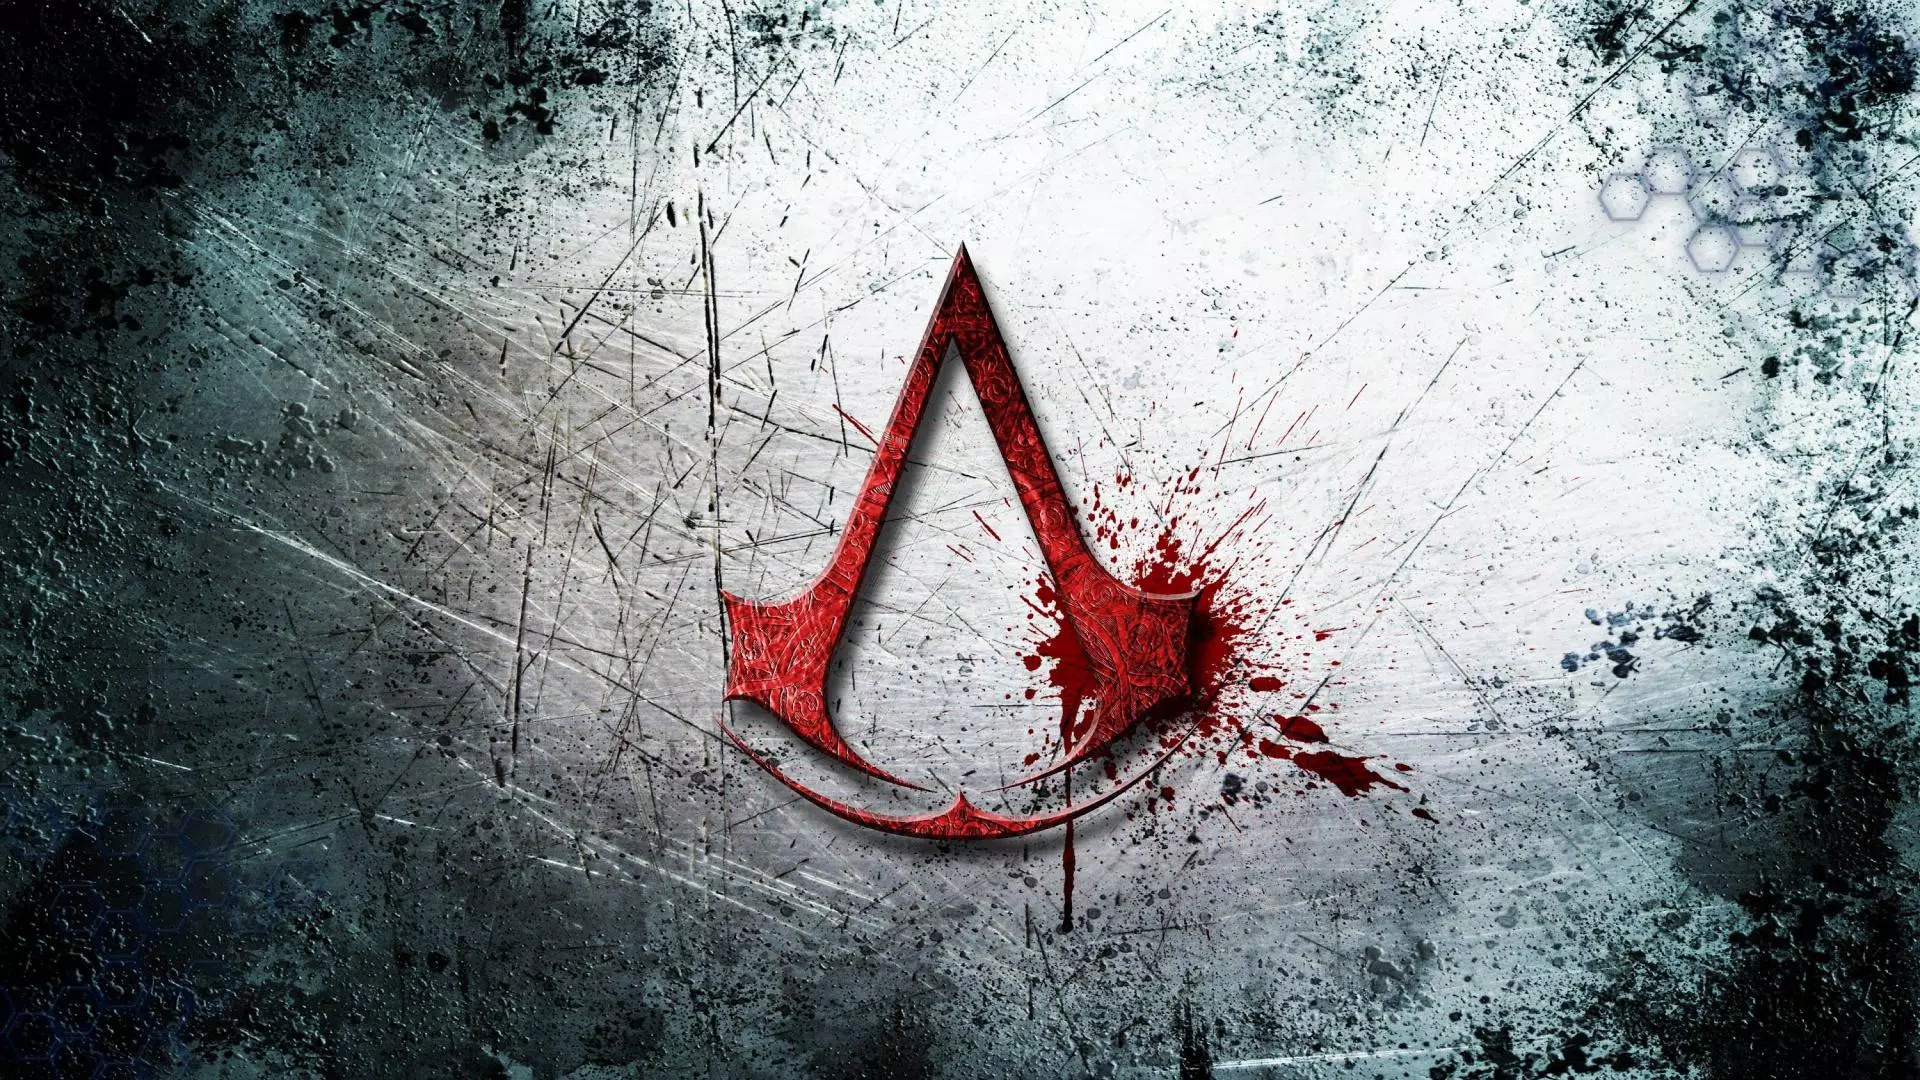 Assasins creed live wallpaper for Android. Assasins creed free